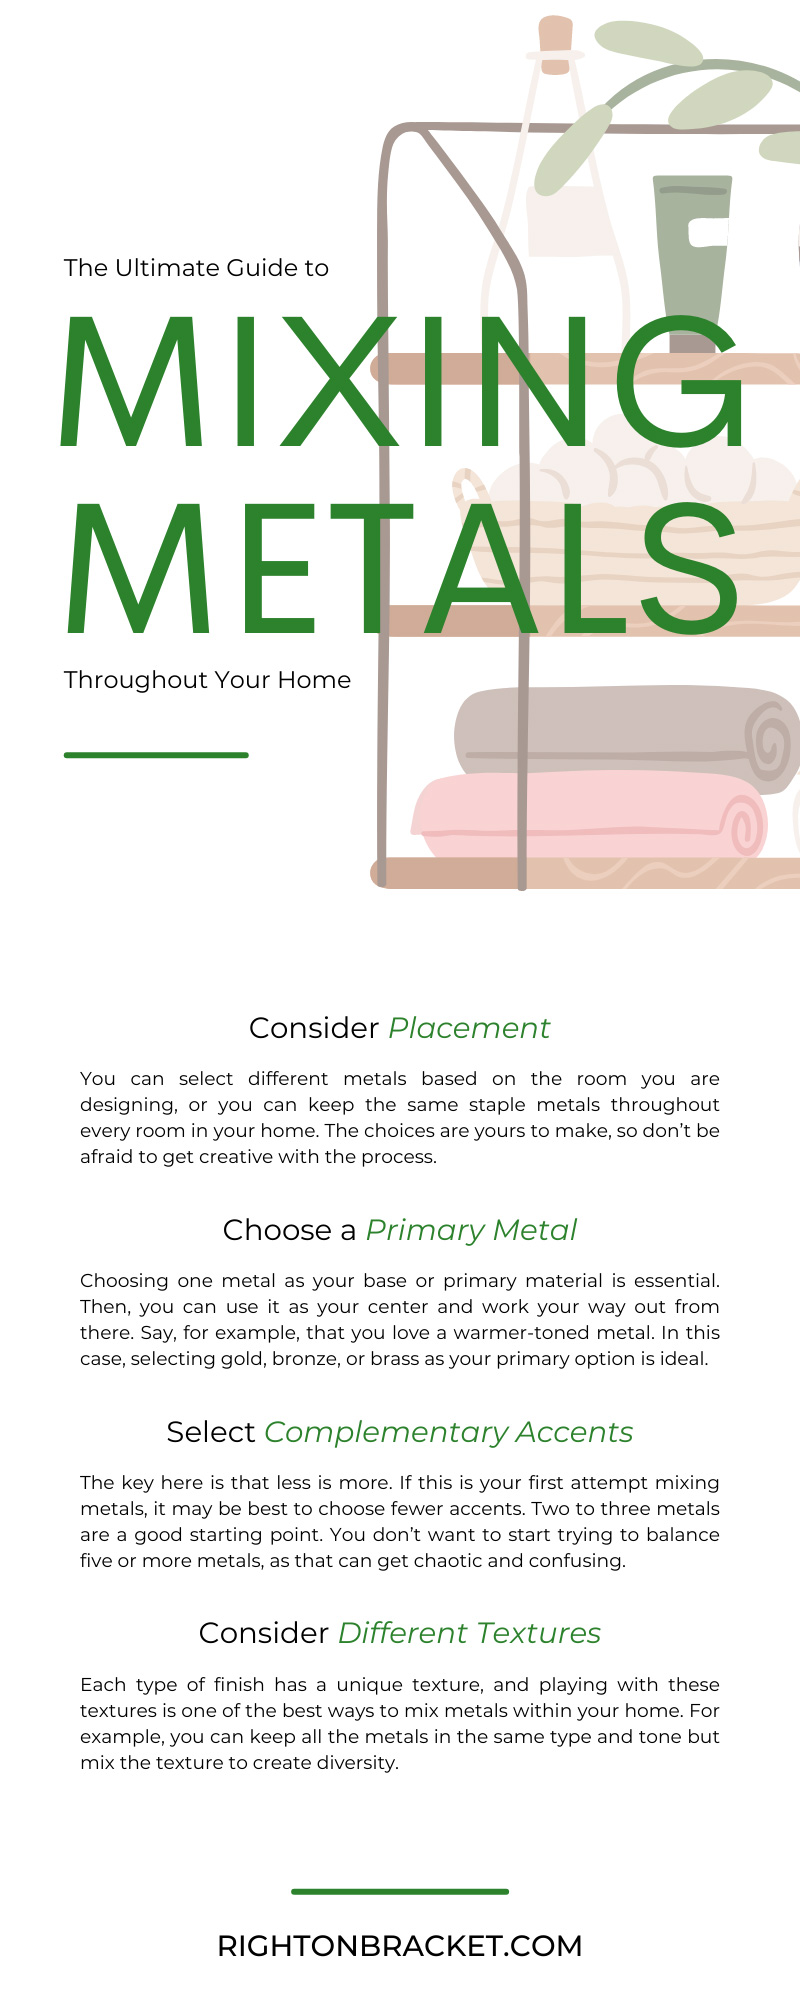 The Ultimate Guide to Mixing Metals Throughout Your Home
